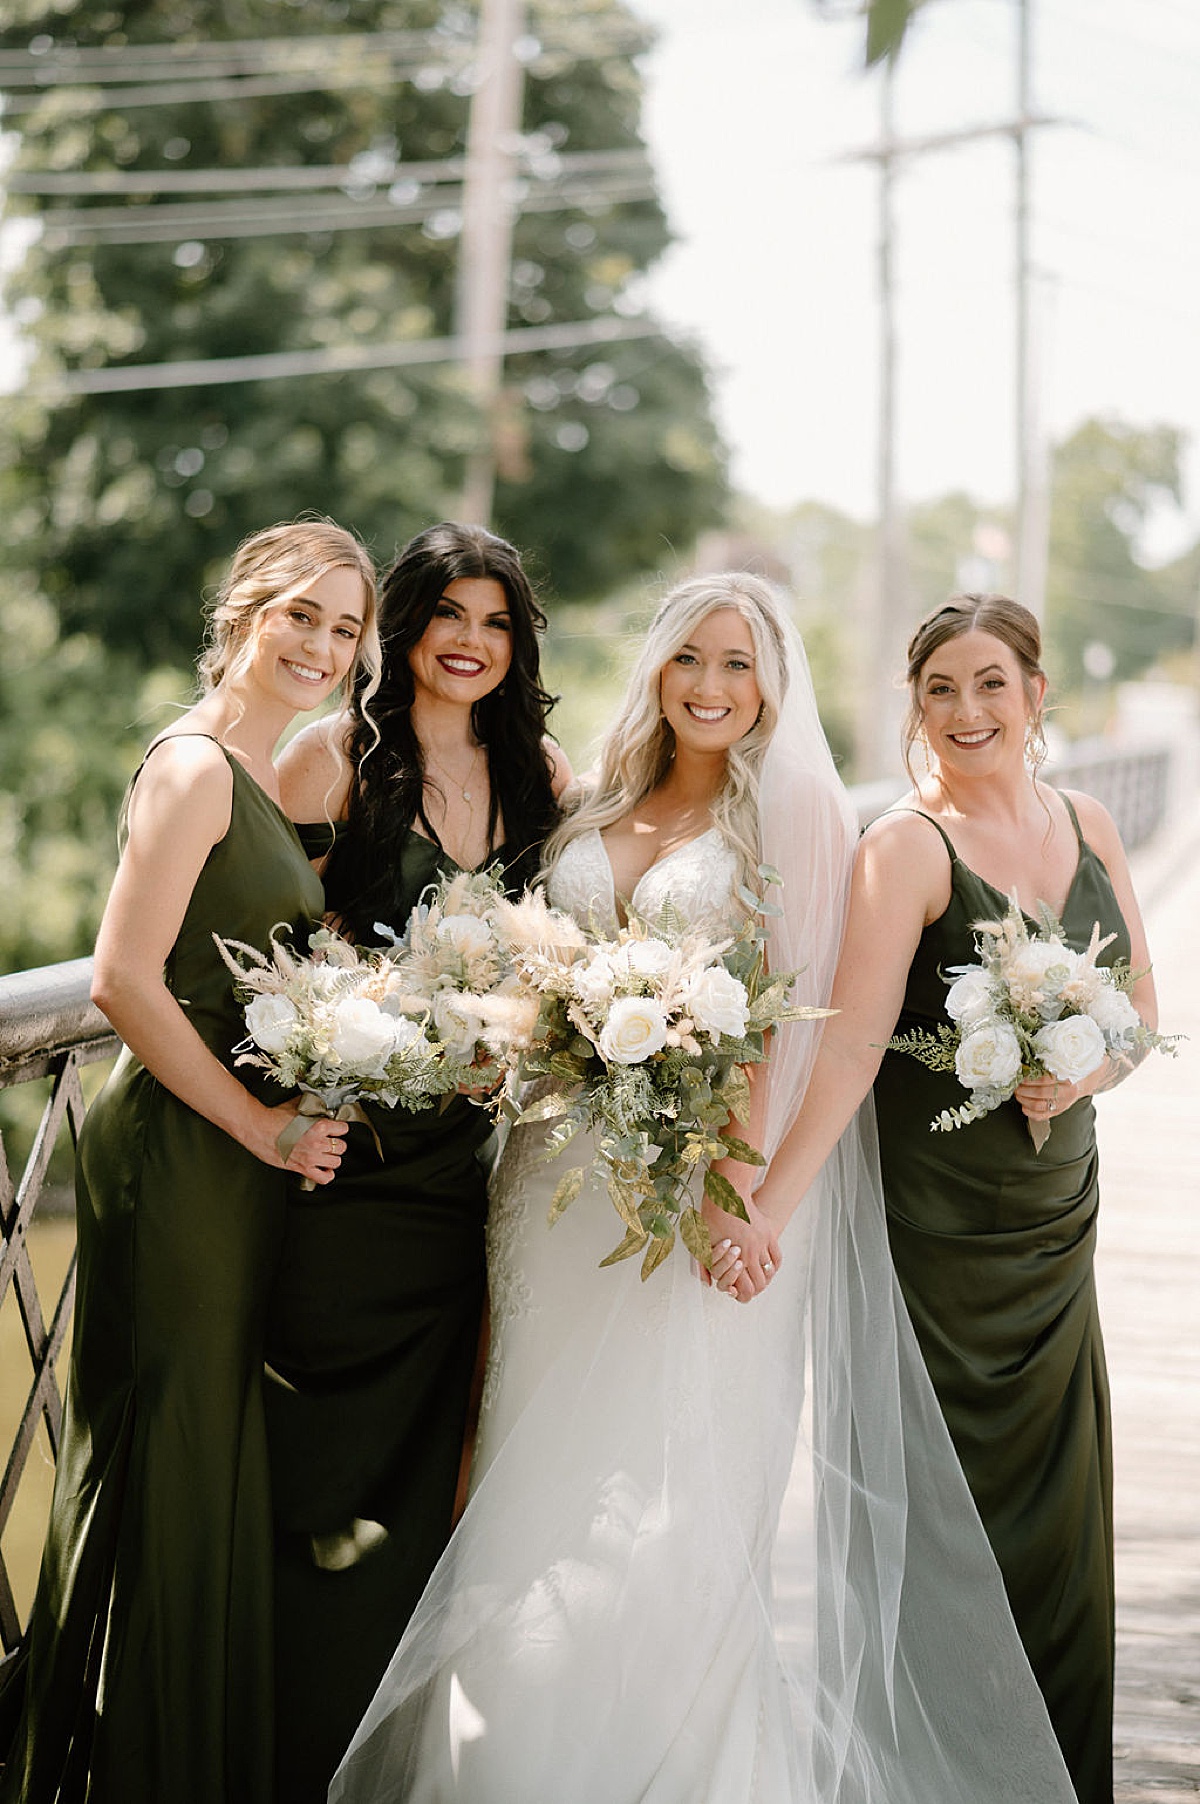 boho classy bride in lace gown and bouquet of roses, eucalyptus, and pampas grass poses with bridesmaids in green gowns shot by Indigo Lace Collective